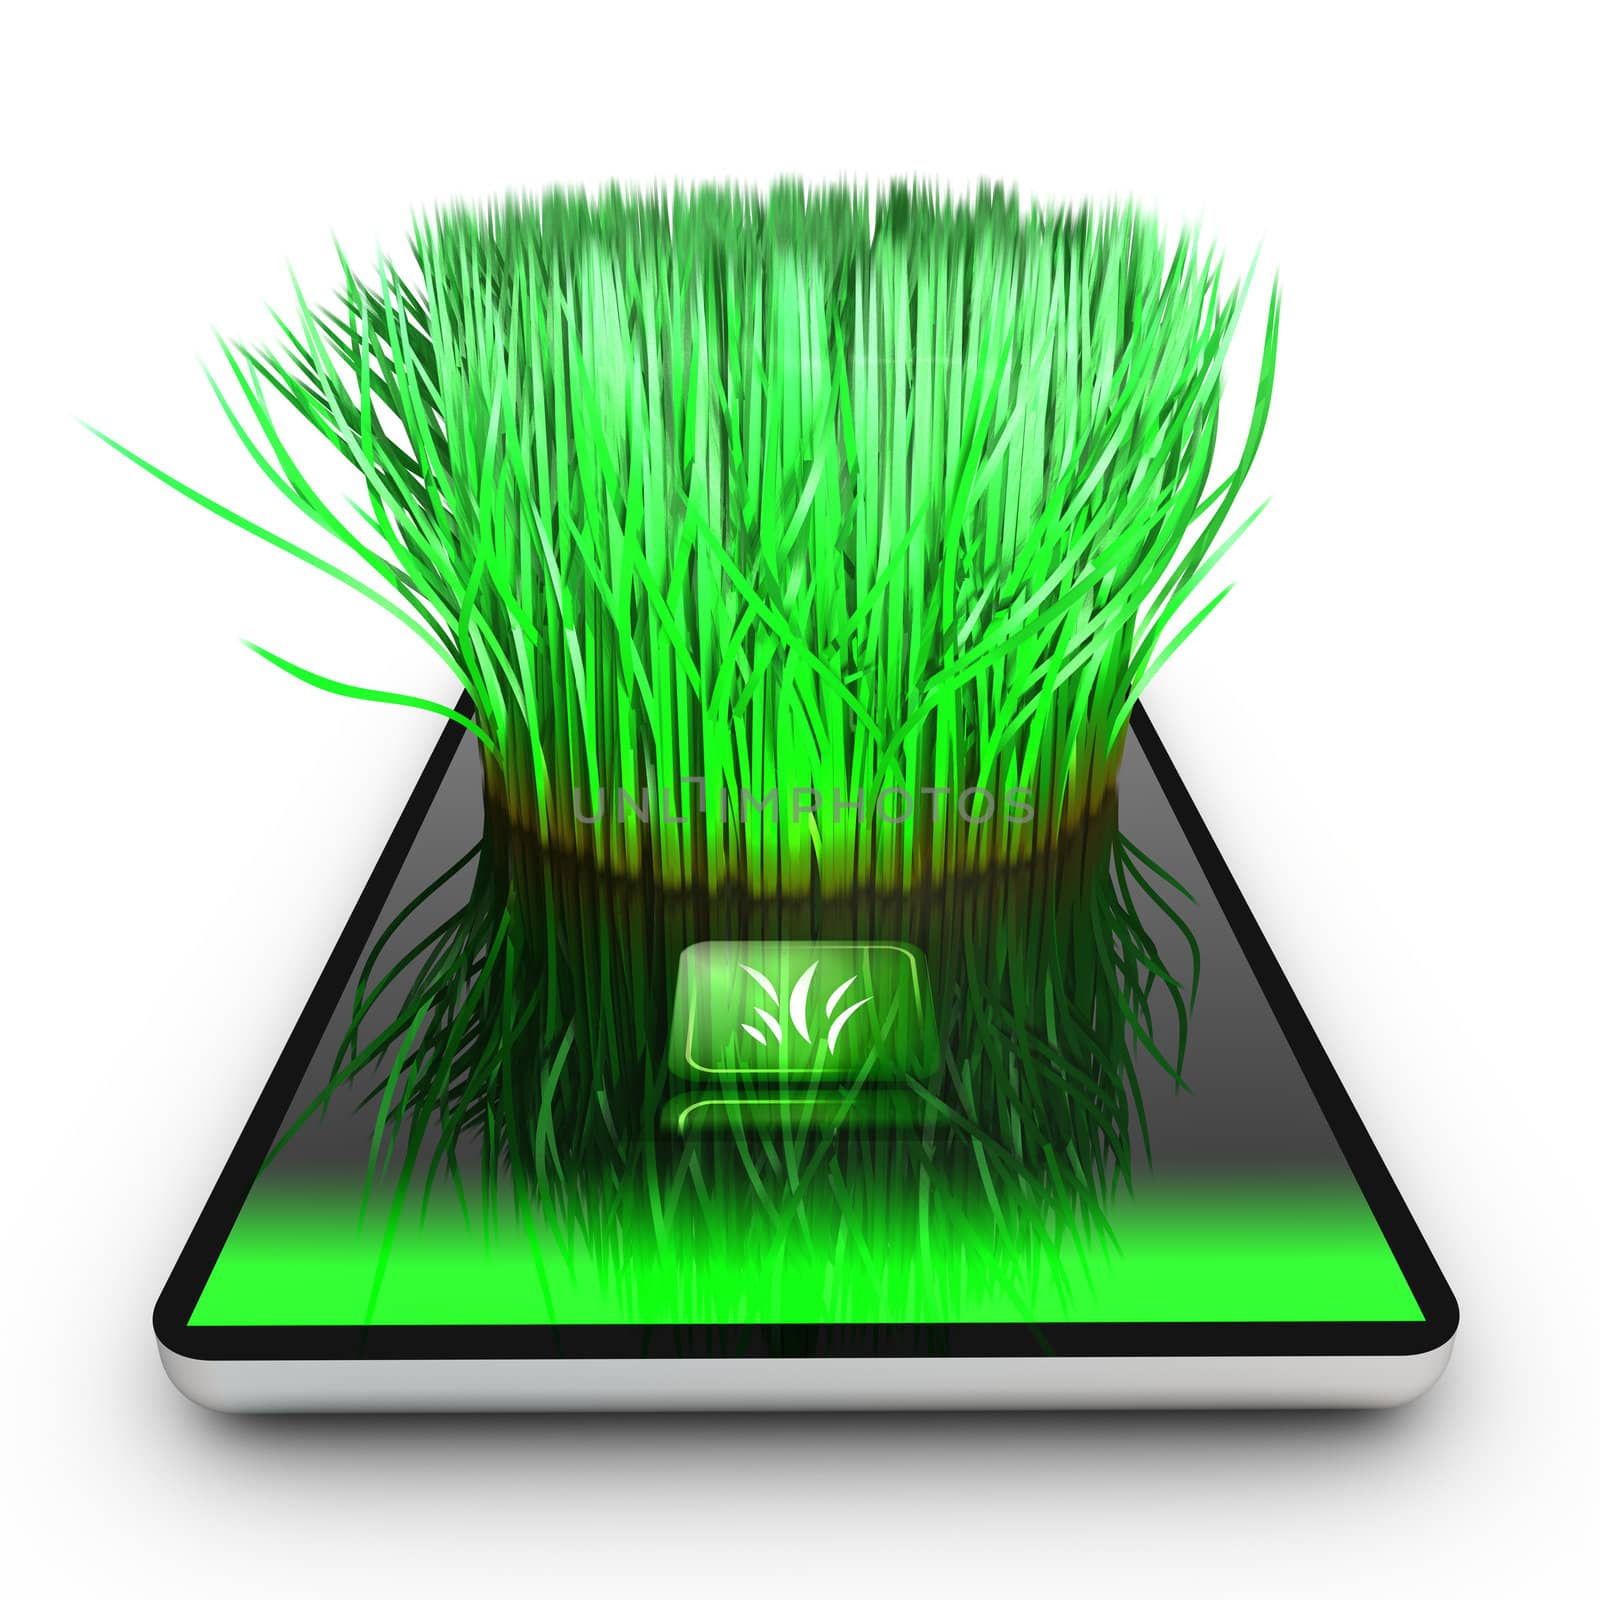 A smartphone application is growing grass. Ecological concept.